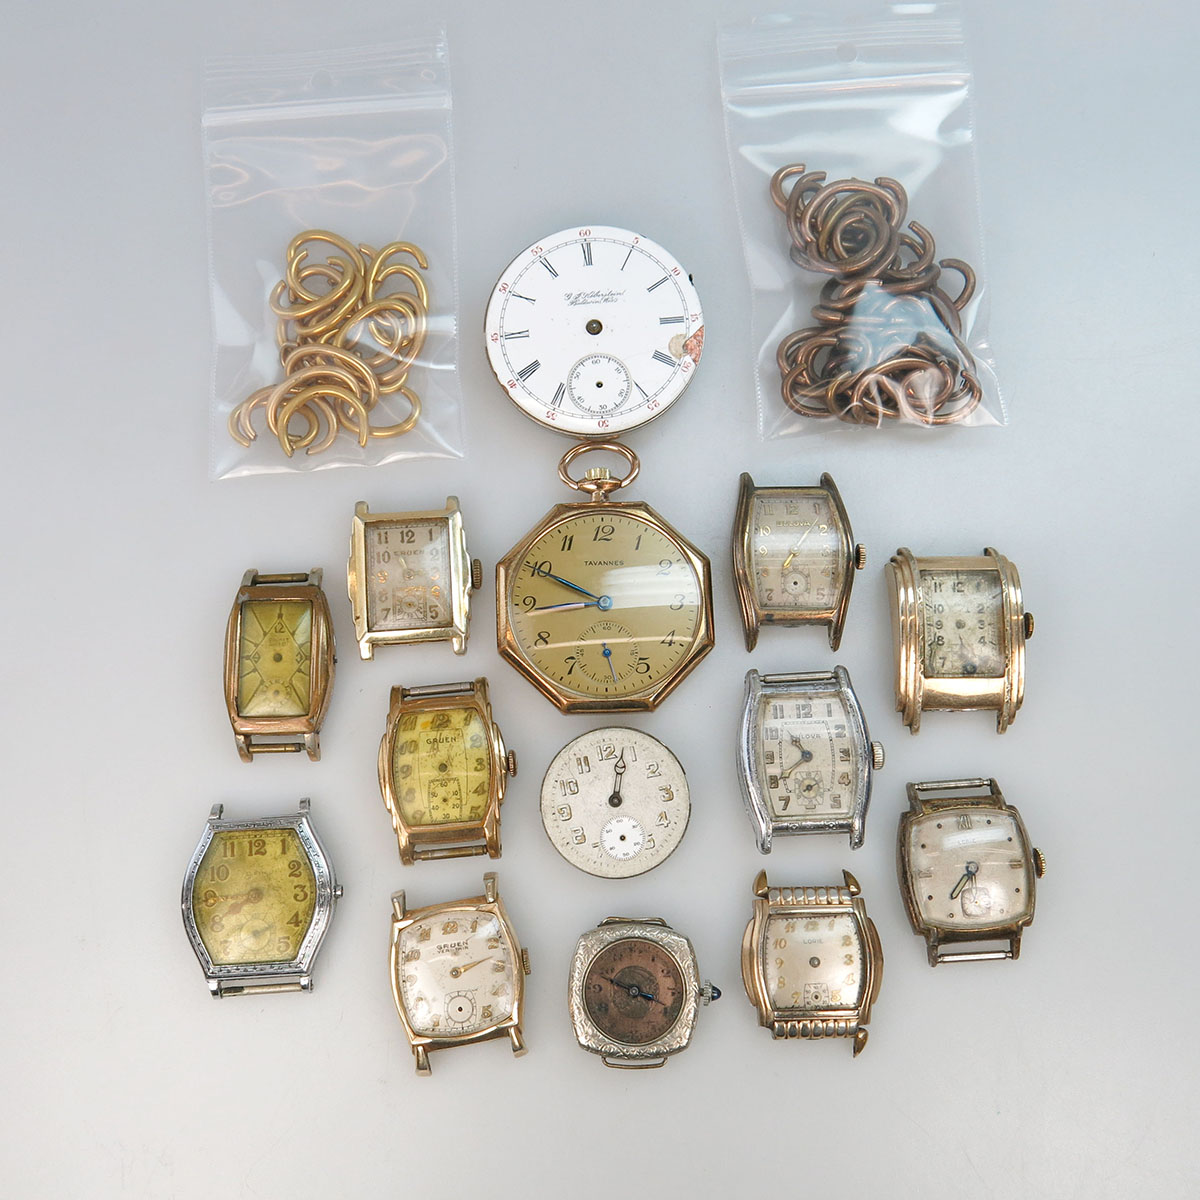 Quantity Of Watches And Watch Parts